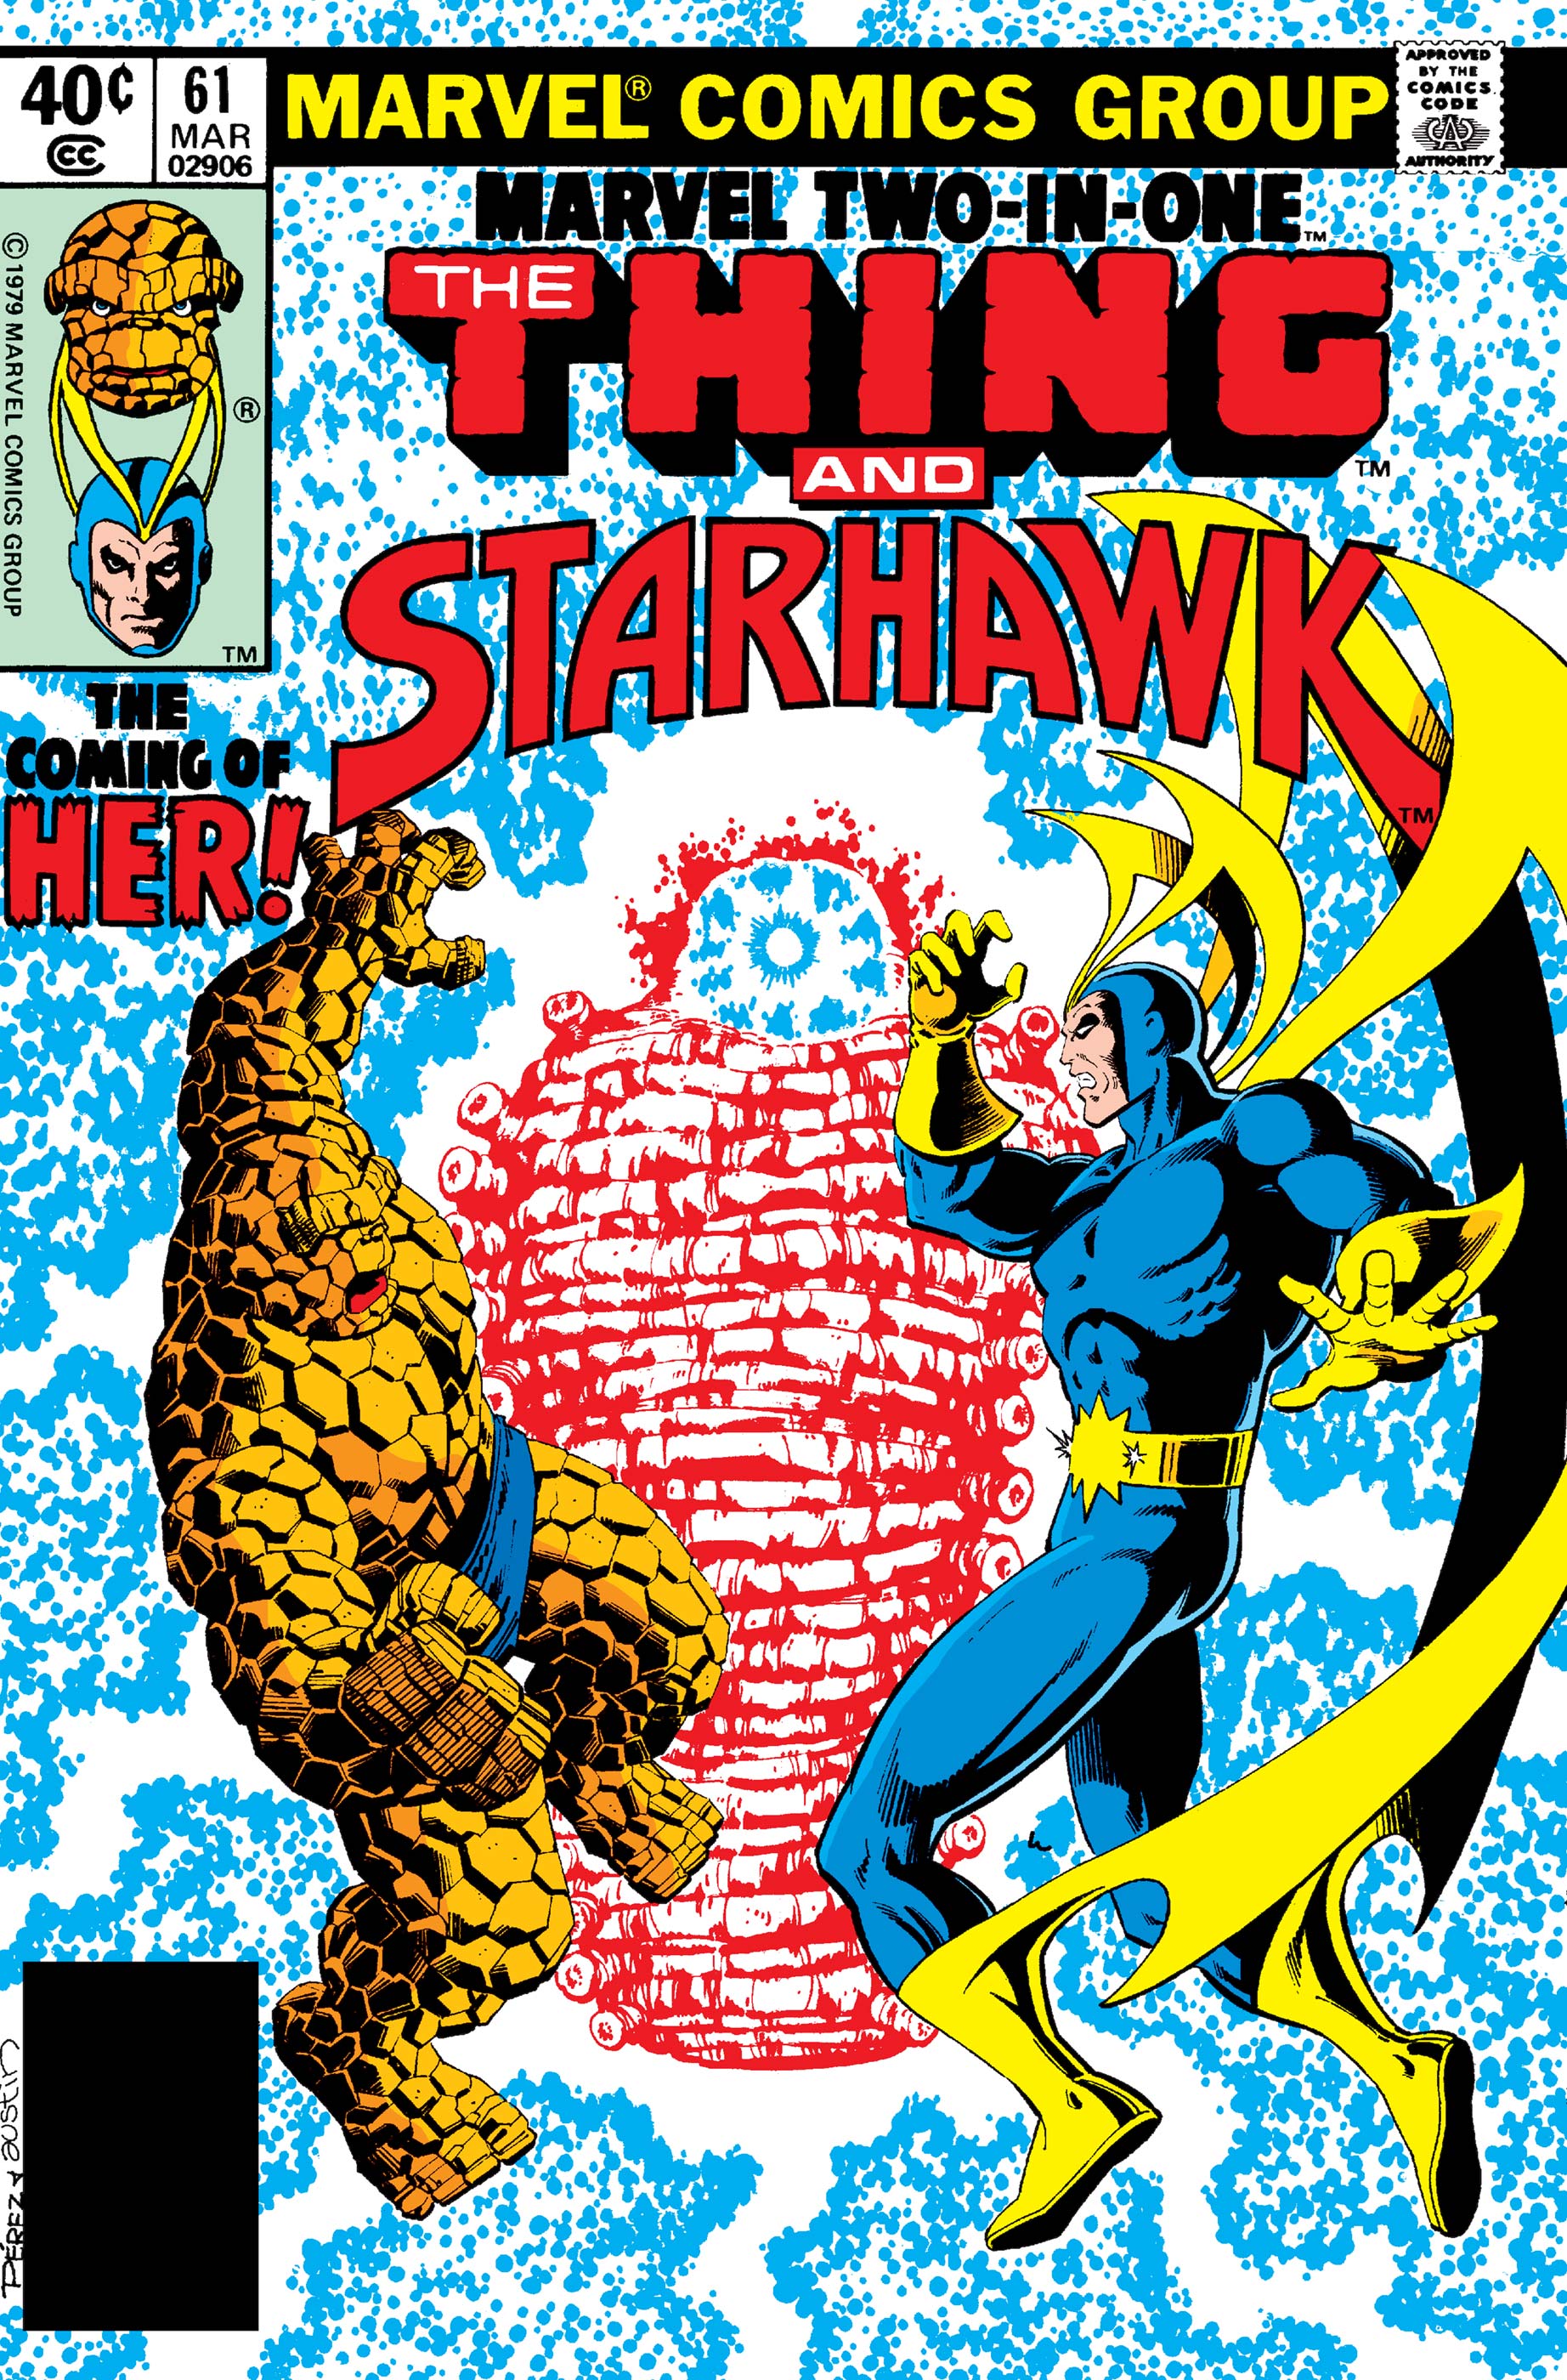 Marvel Two-in-One (1974) #61